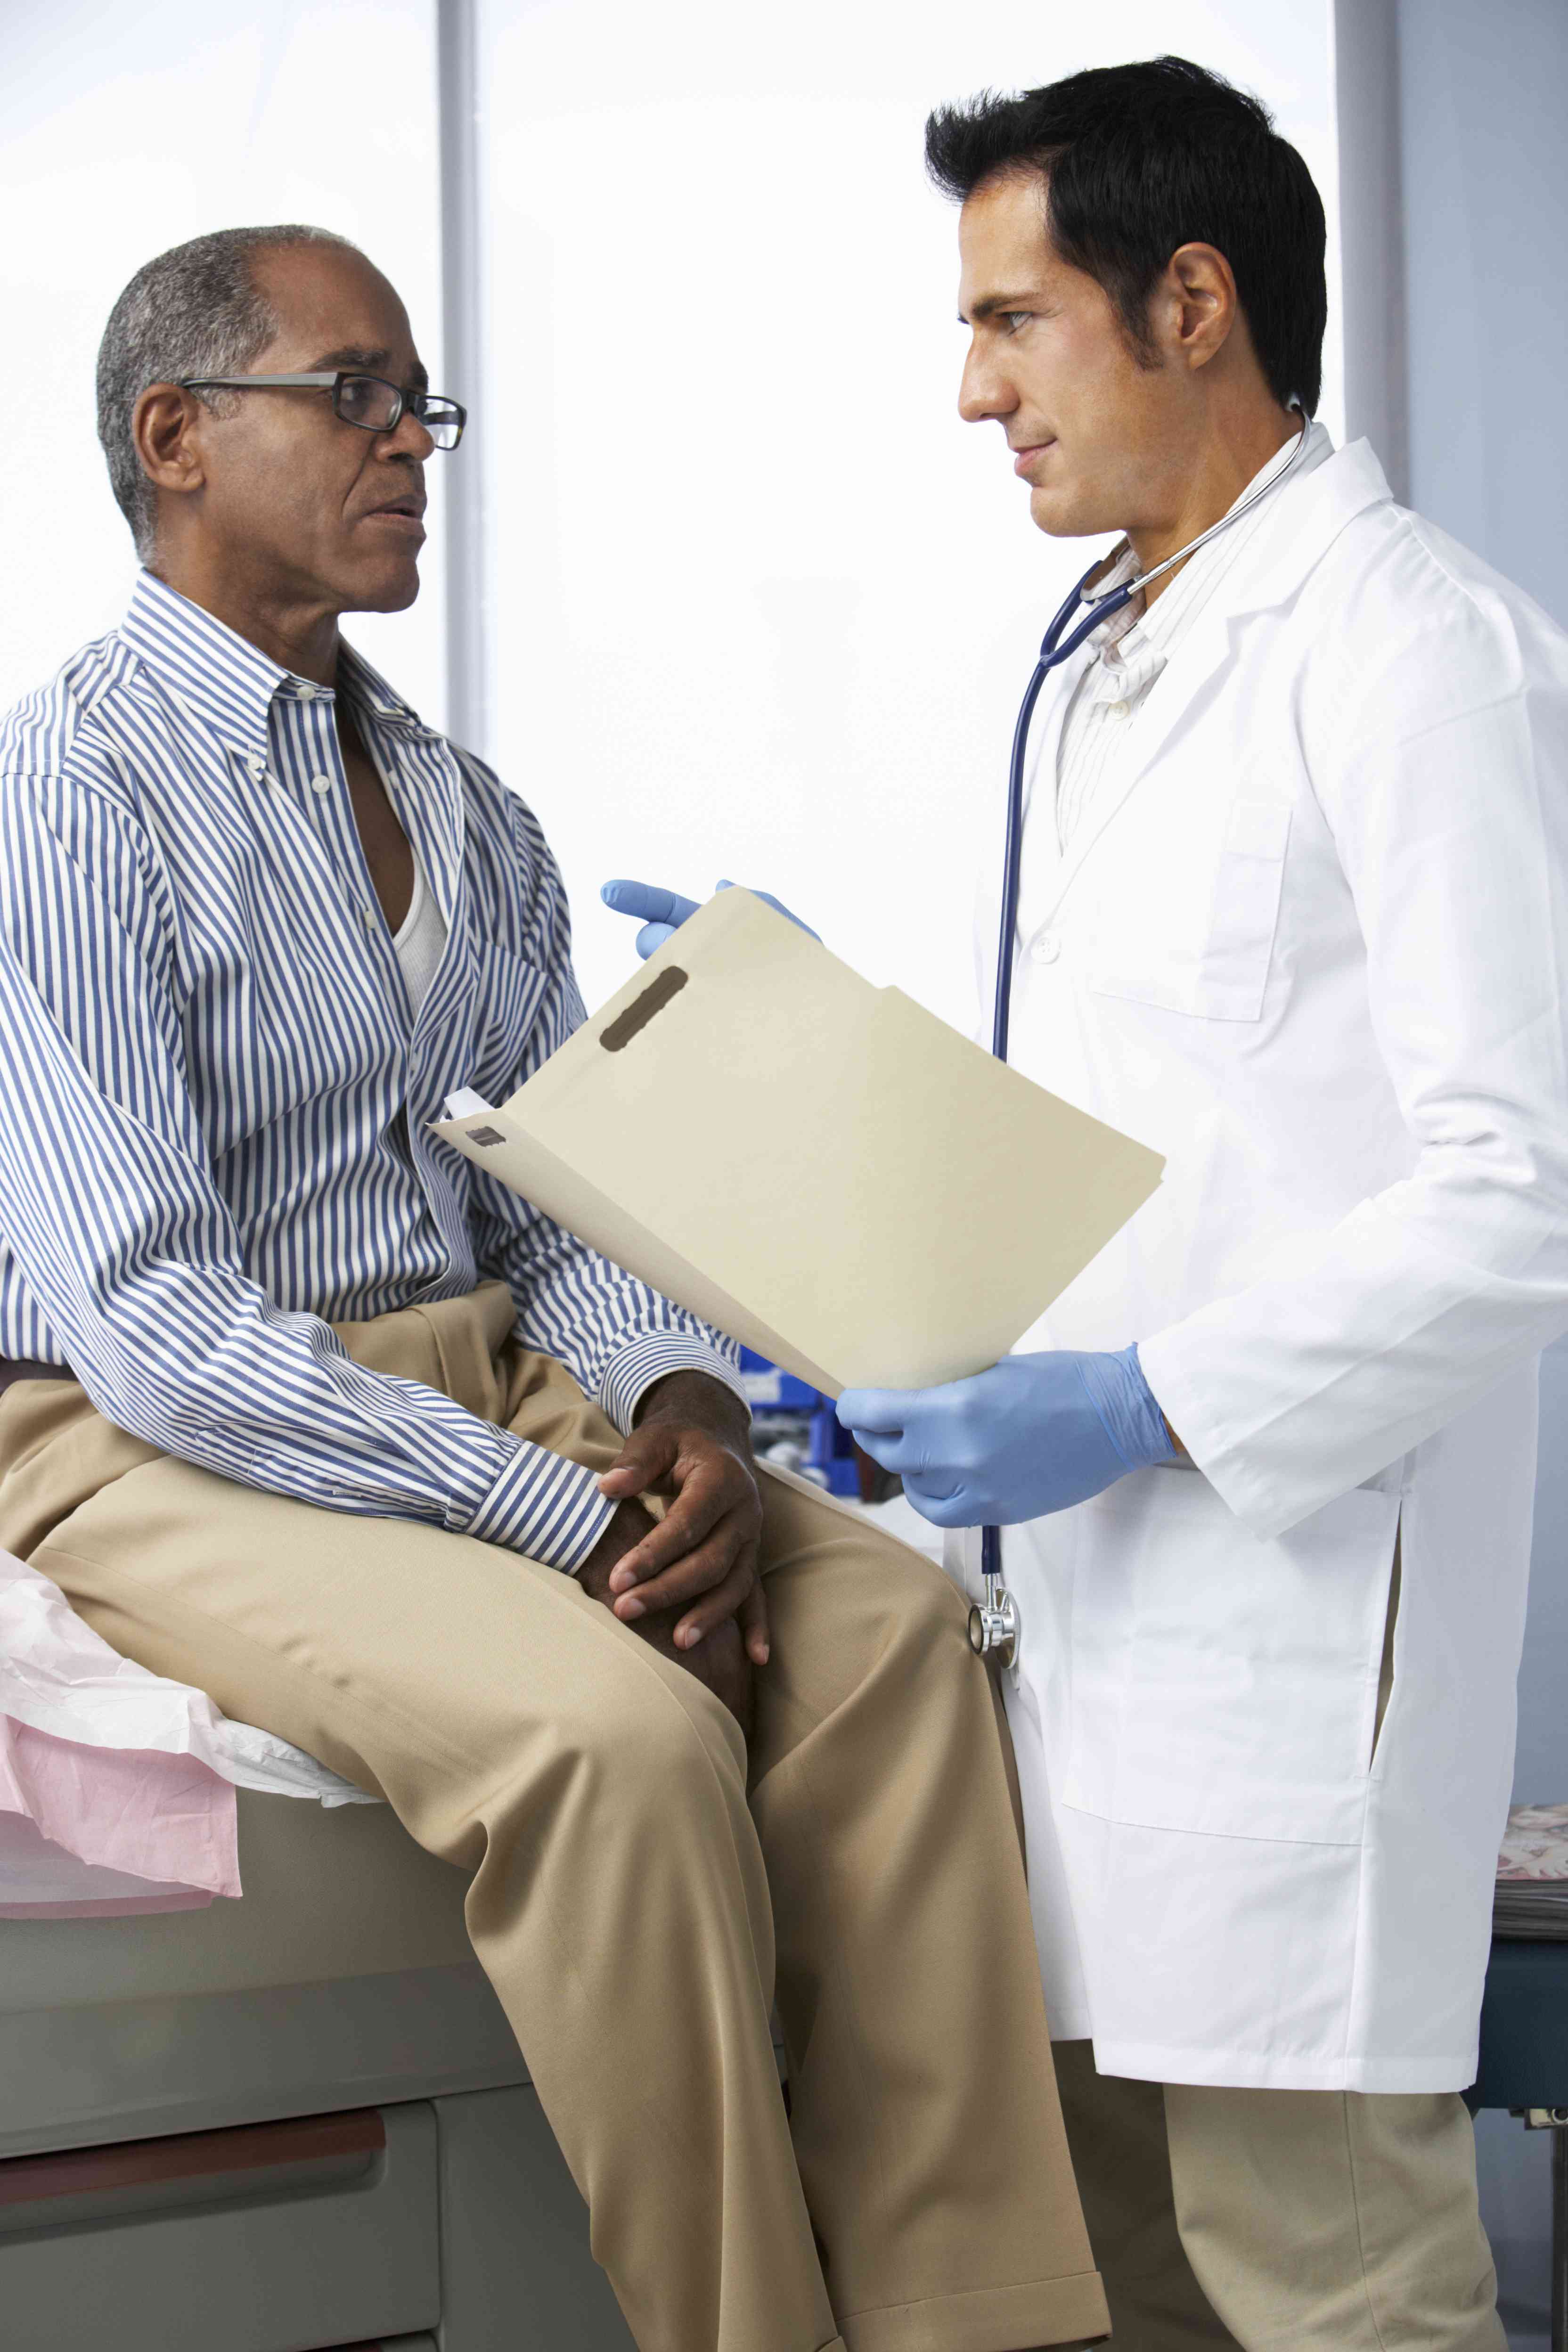 Black man speaking with doctor in White coat